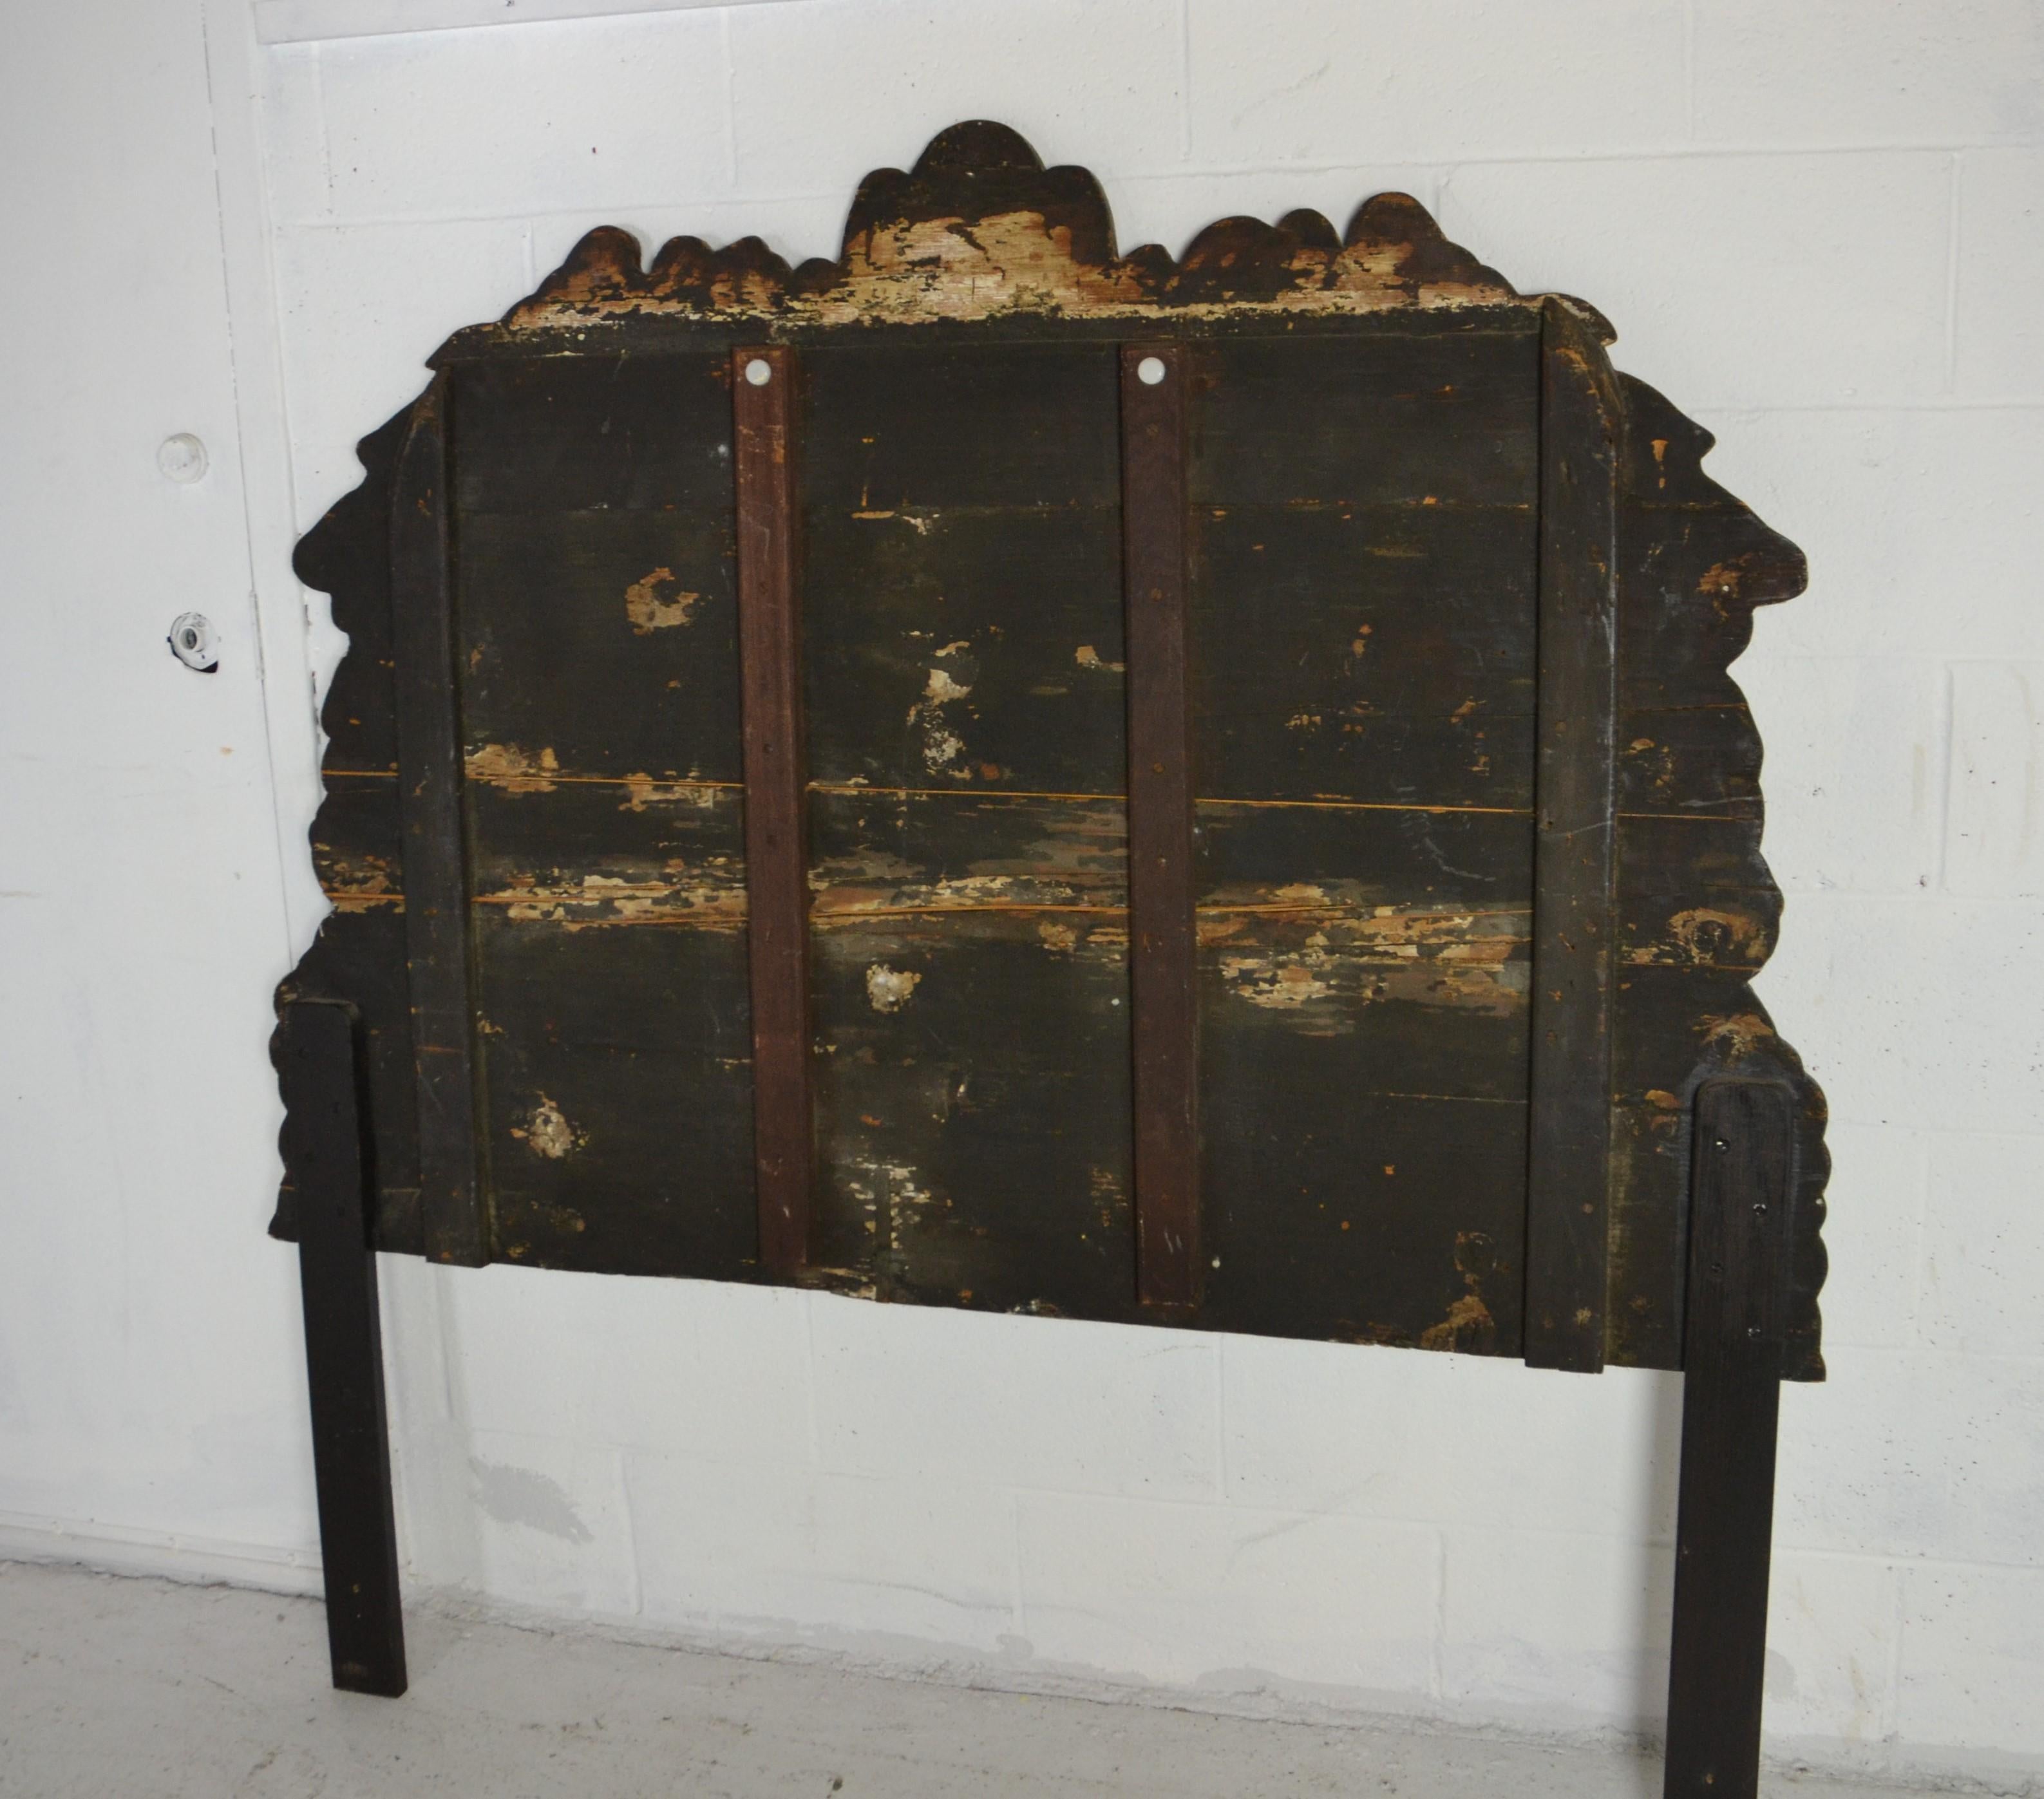 This is a period headboard with a hand painted design in the medieval style. Shows great age on the reverse. Probably late 17th-early 18th century. Great item for a medieval setting.